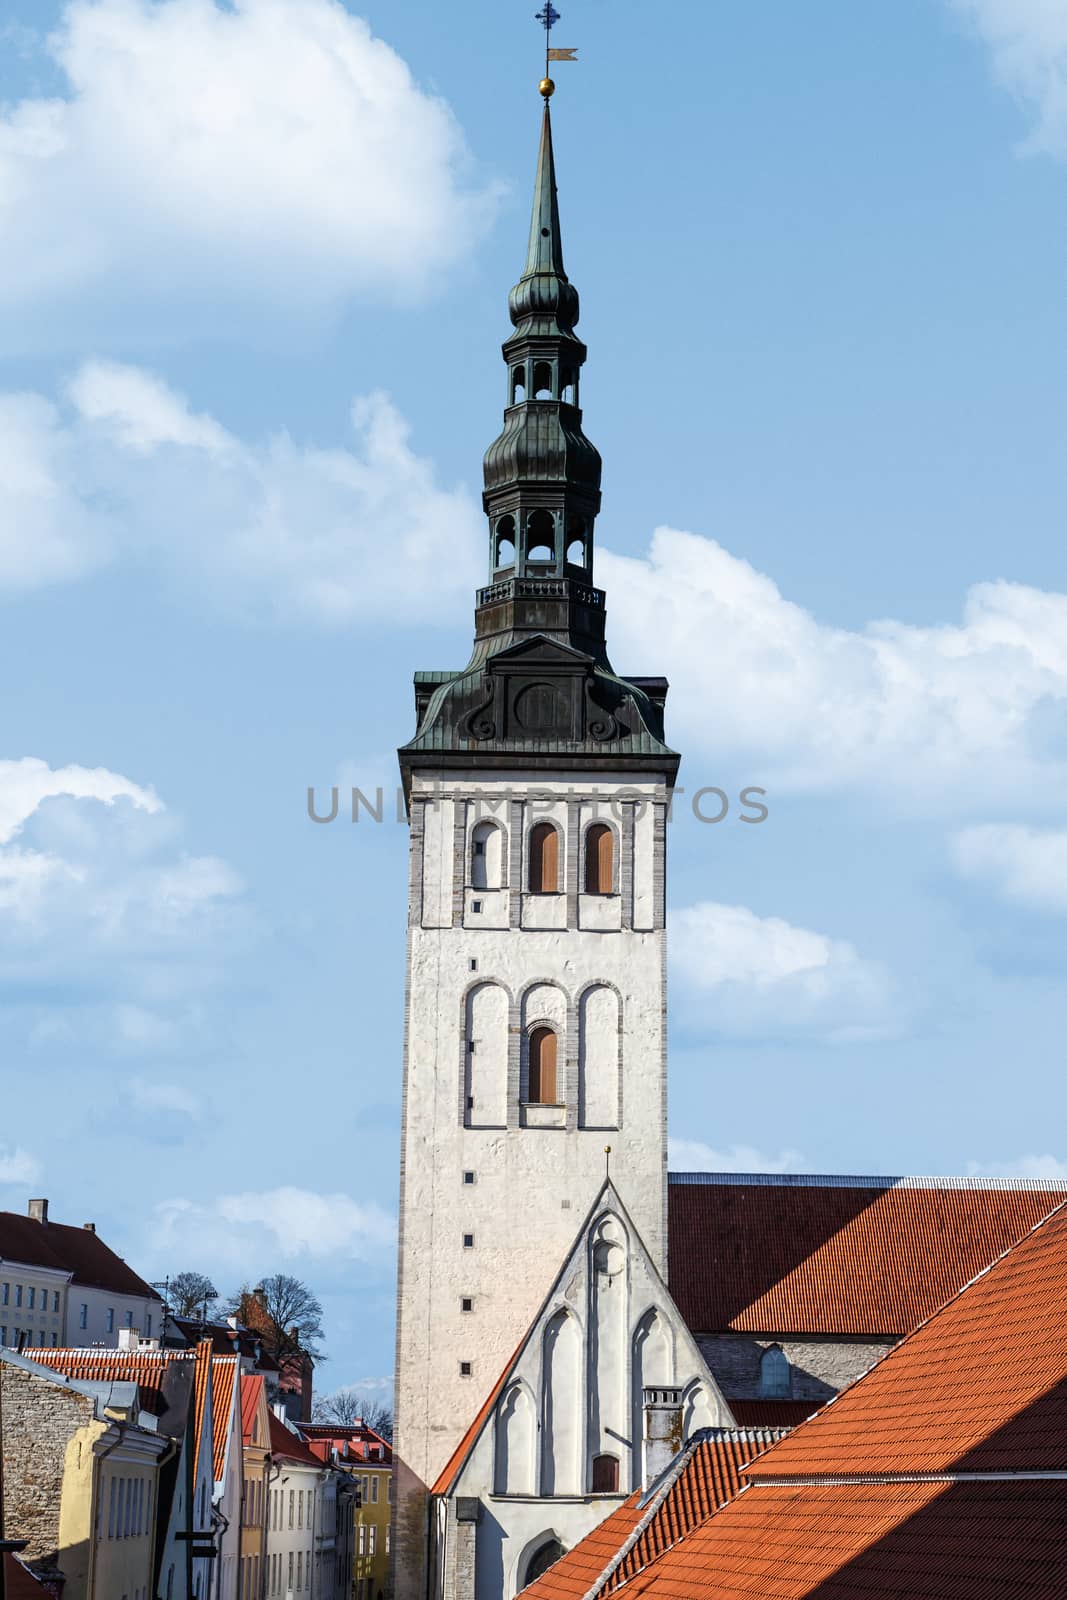 Front view of the medieval former St Nicholas Church, in Tallinn, Estonia, dedicated to Saint Nicholas, on blue cloudy sky background.